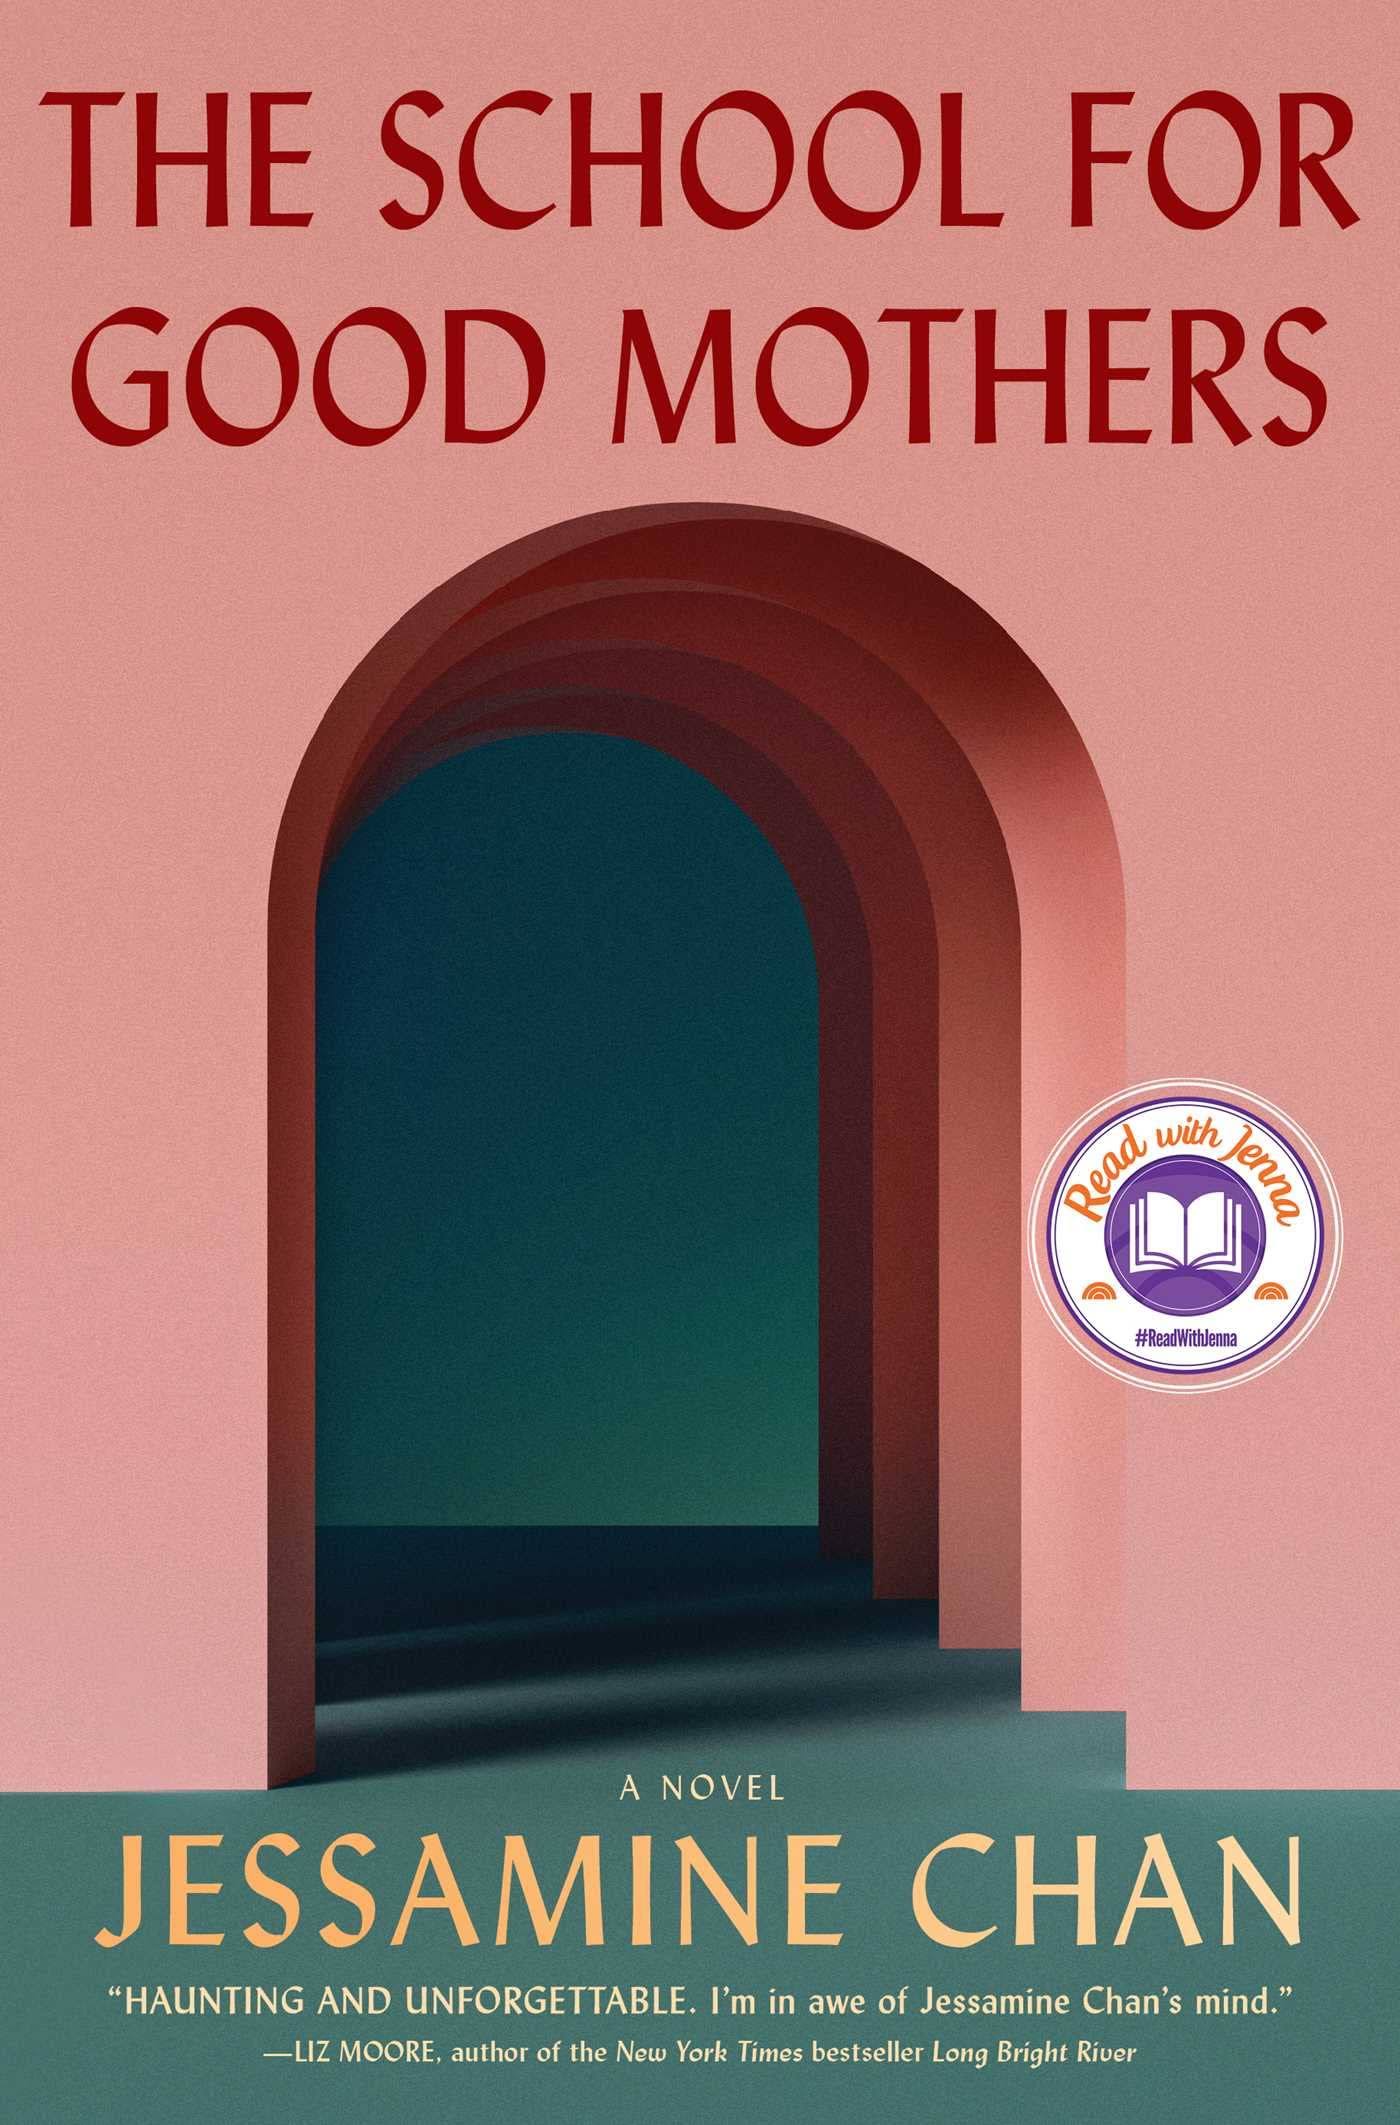 The School for Good Mothers: A Novel [Book]